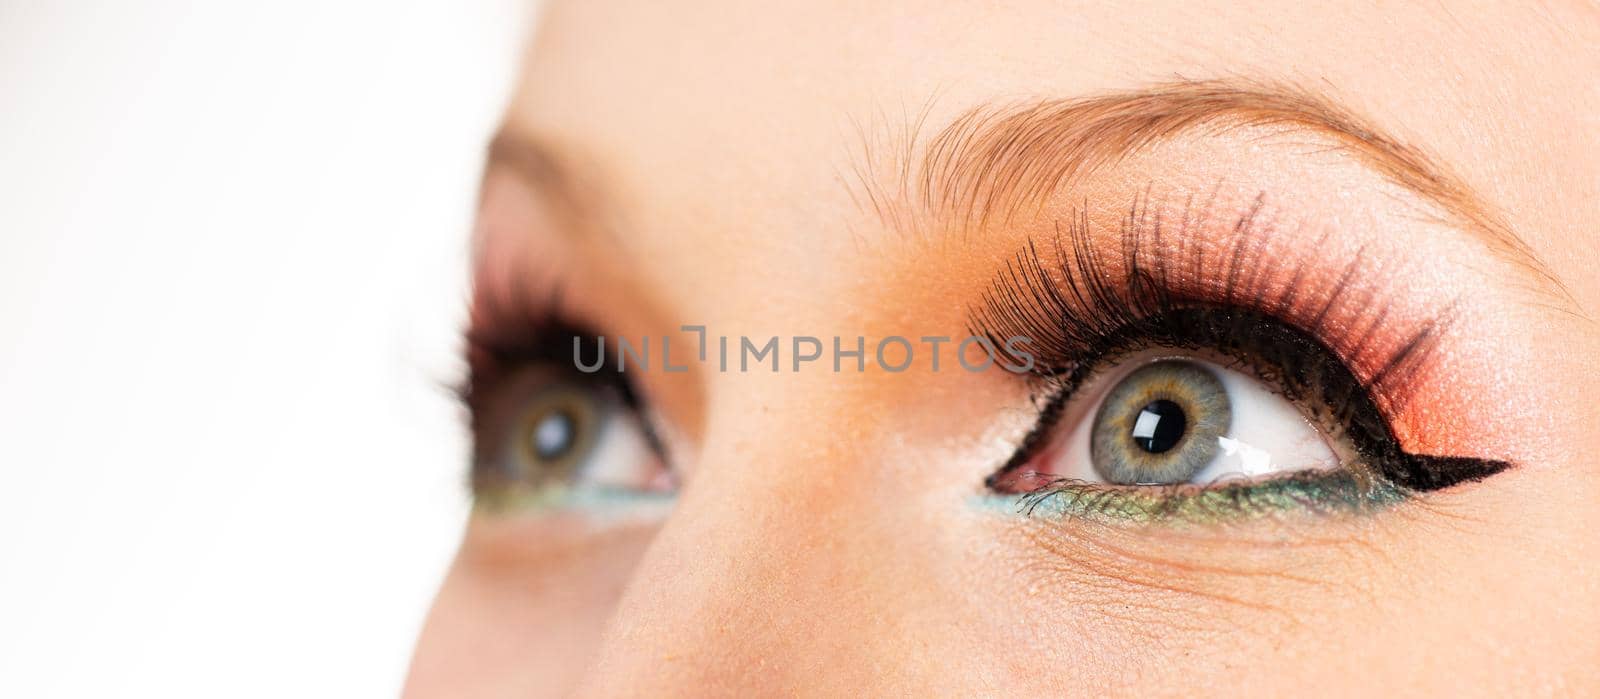 Close up eyes of a woman. Portrait of a beautiful girl.The pupil and iris of the eye close-up. Young woman with glitter makeup. Pin up style make up.Close up grey eye with bright makeup. Macro shot with perfect skin